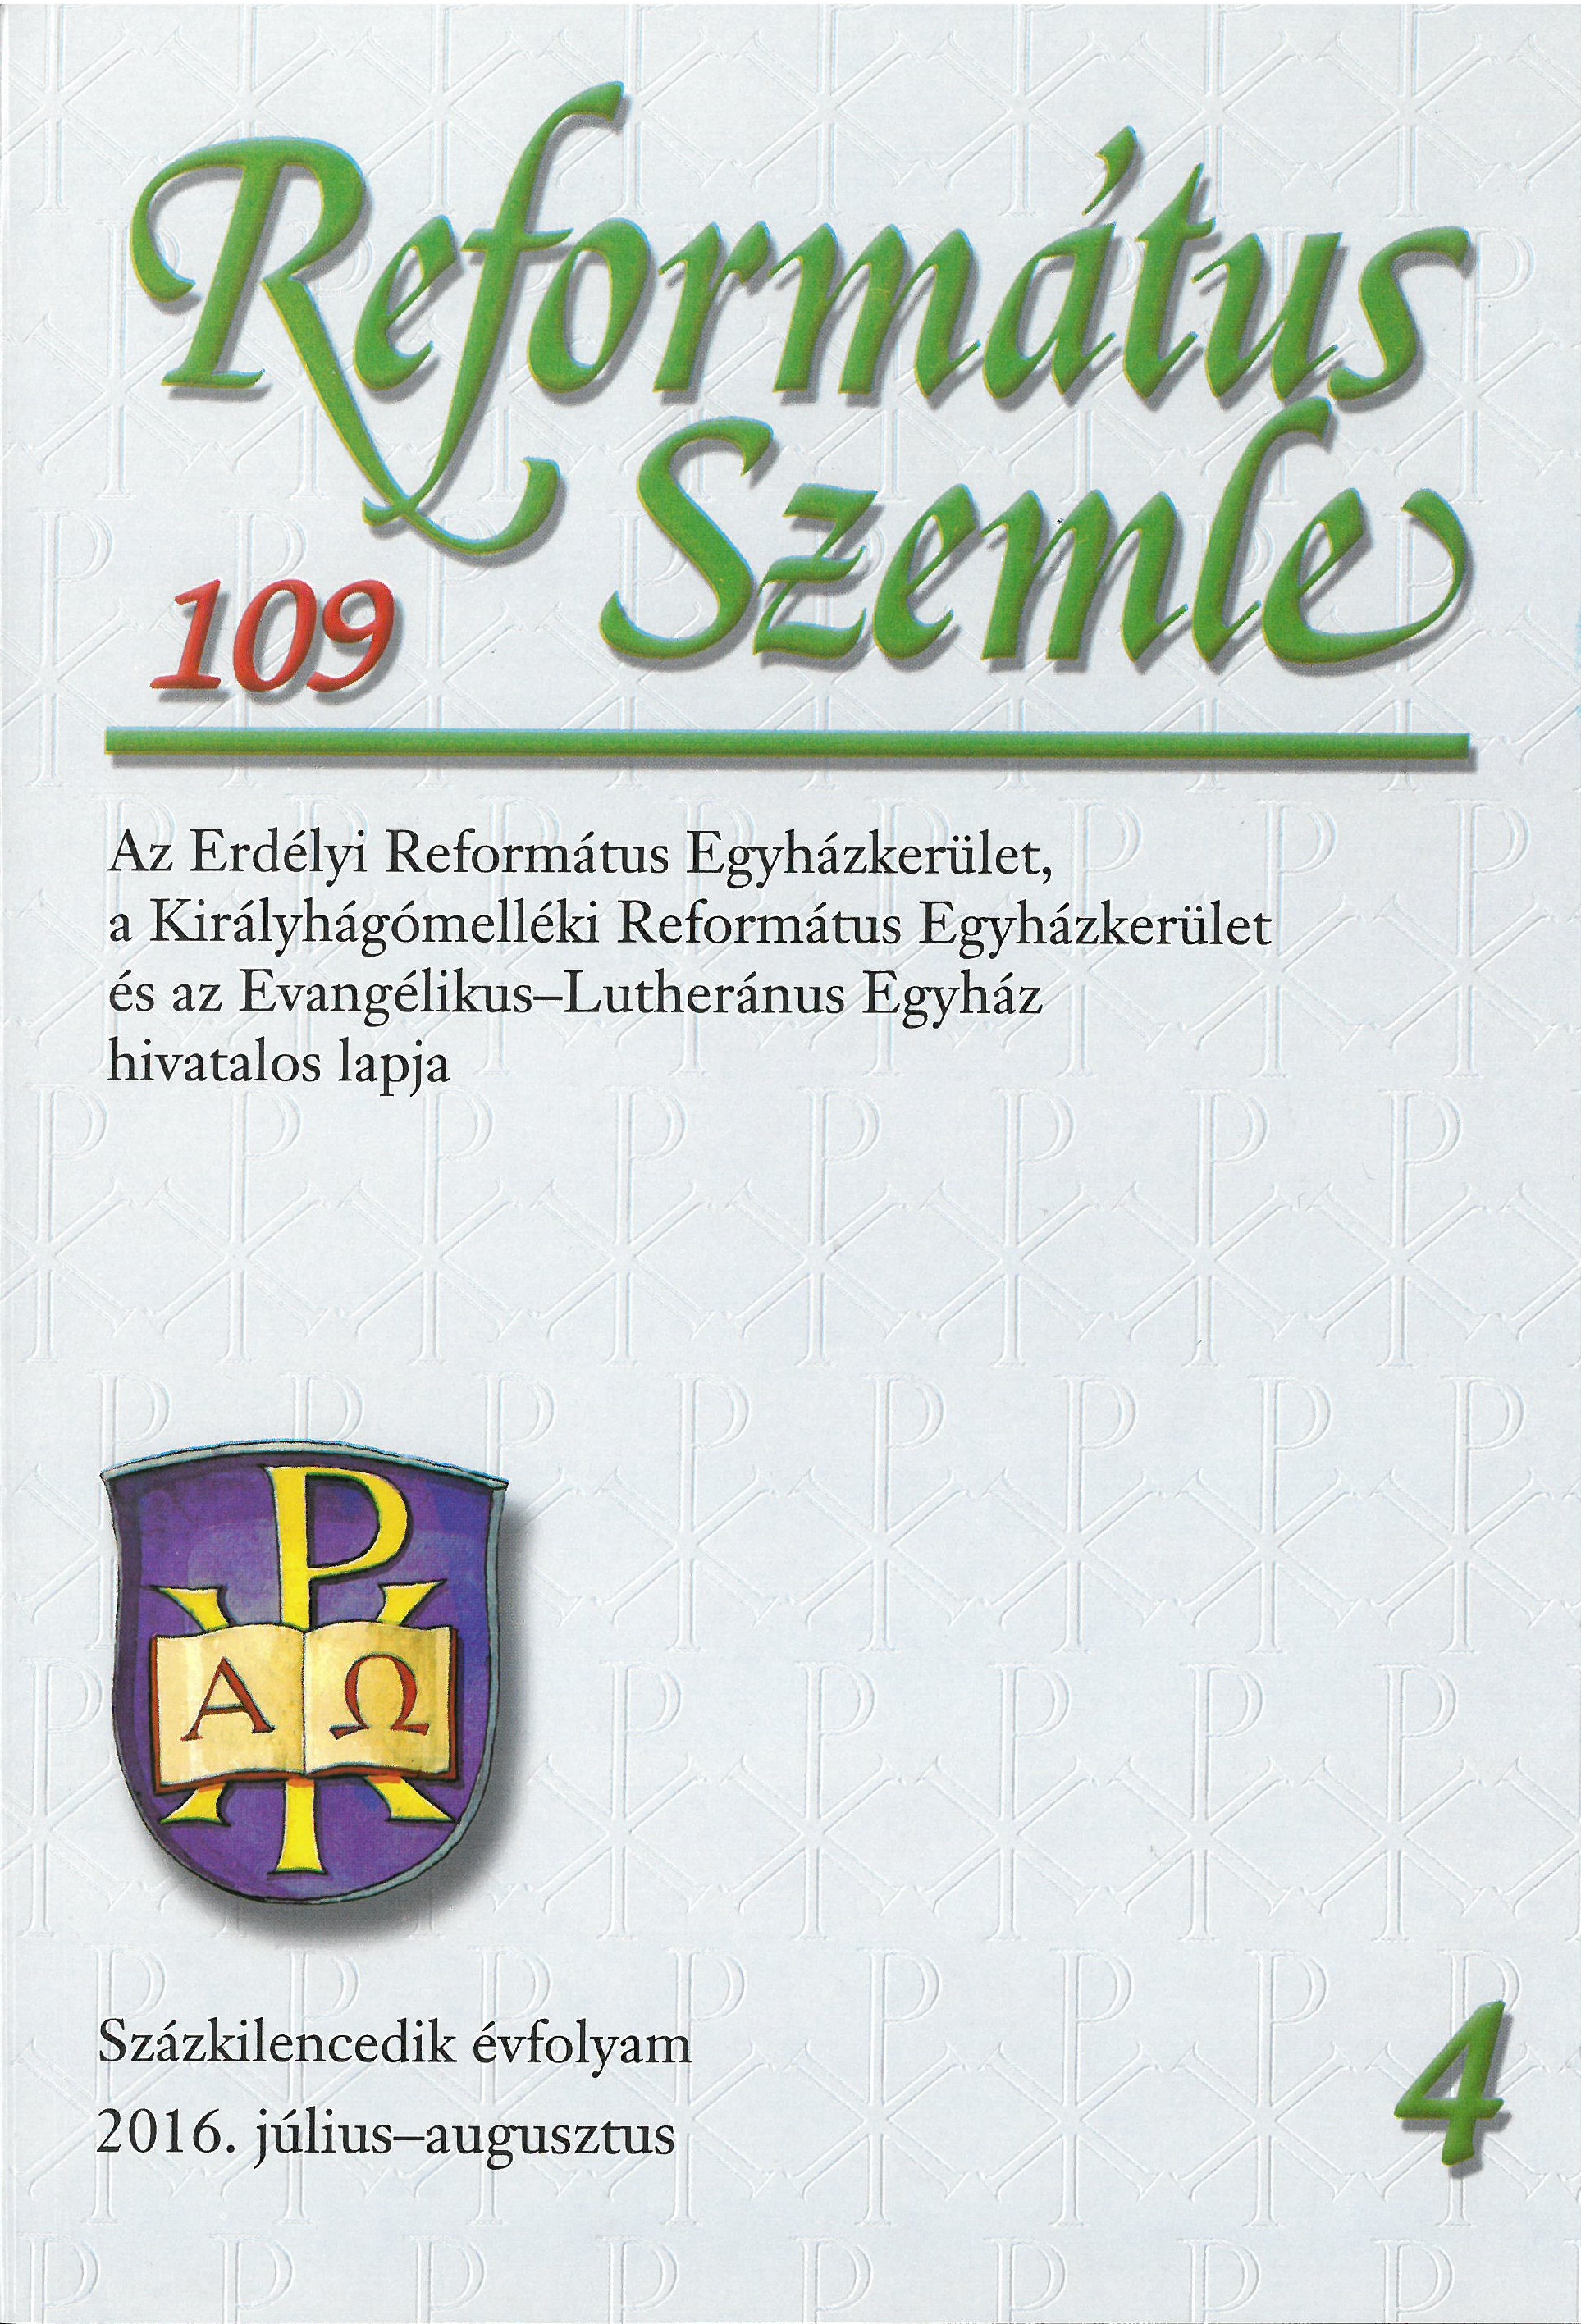 An Index to the Református Szemle (Reformed Review). A Book on the Literary Inheritance, Inner Map, Self-discipline, and Humility Cover Image